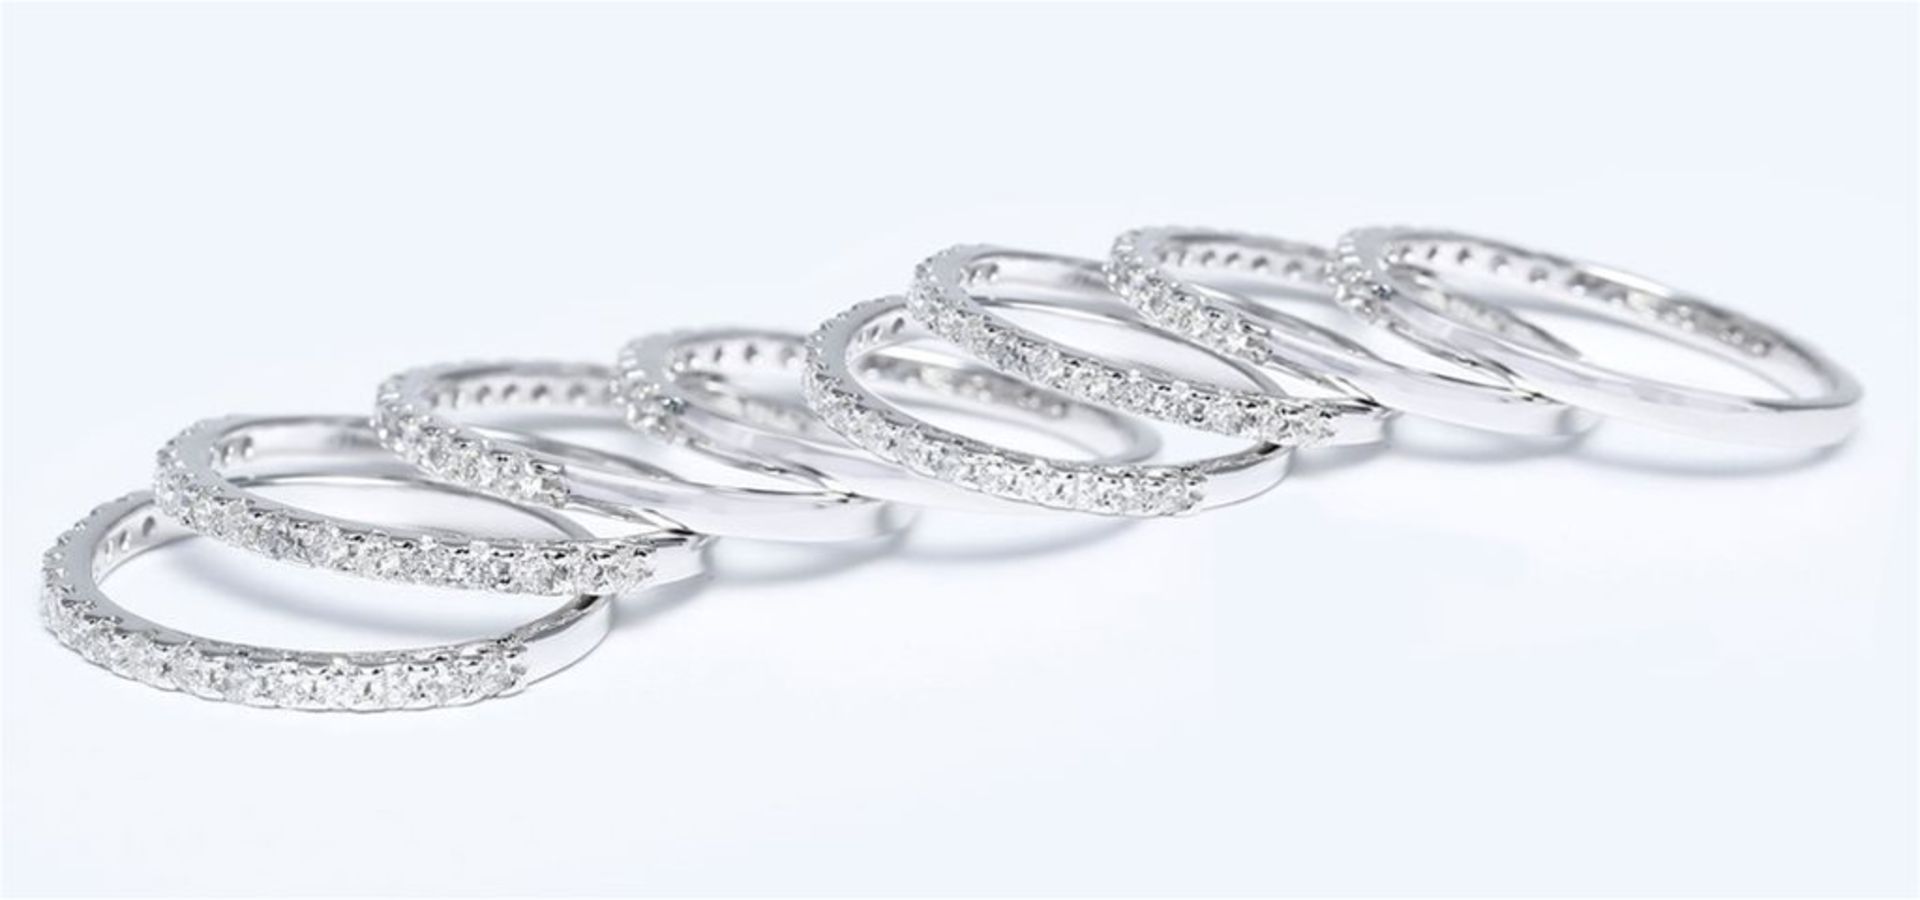 14 K / 585 White gold Set of 8 Diamond Rings stackable - Image 2 of 4